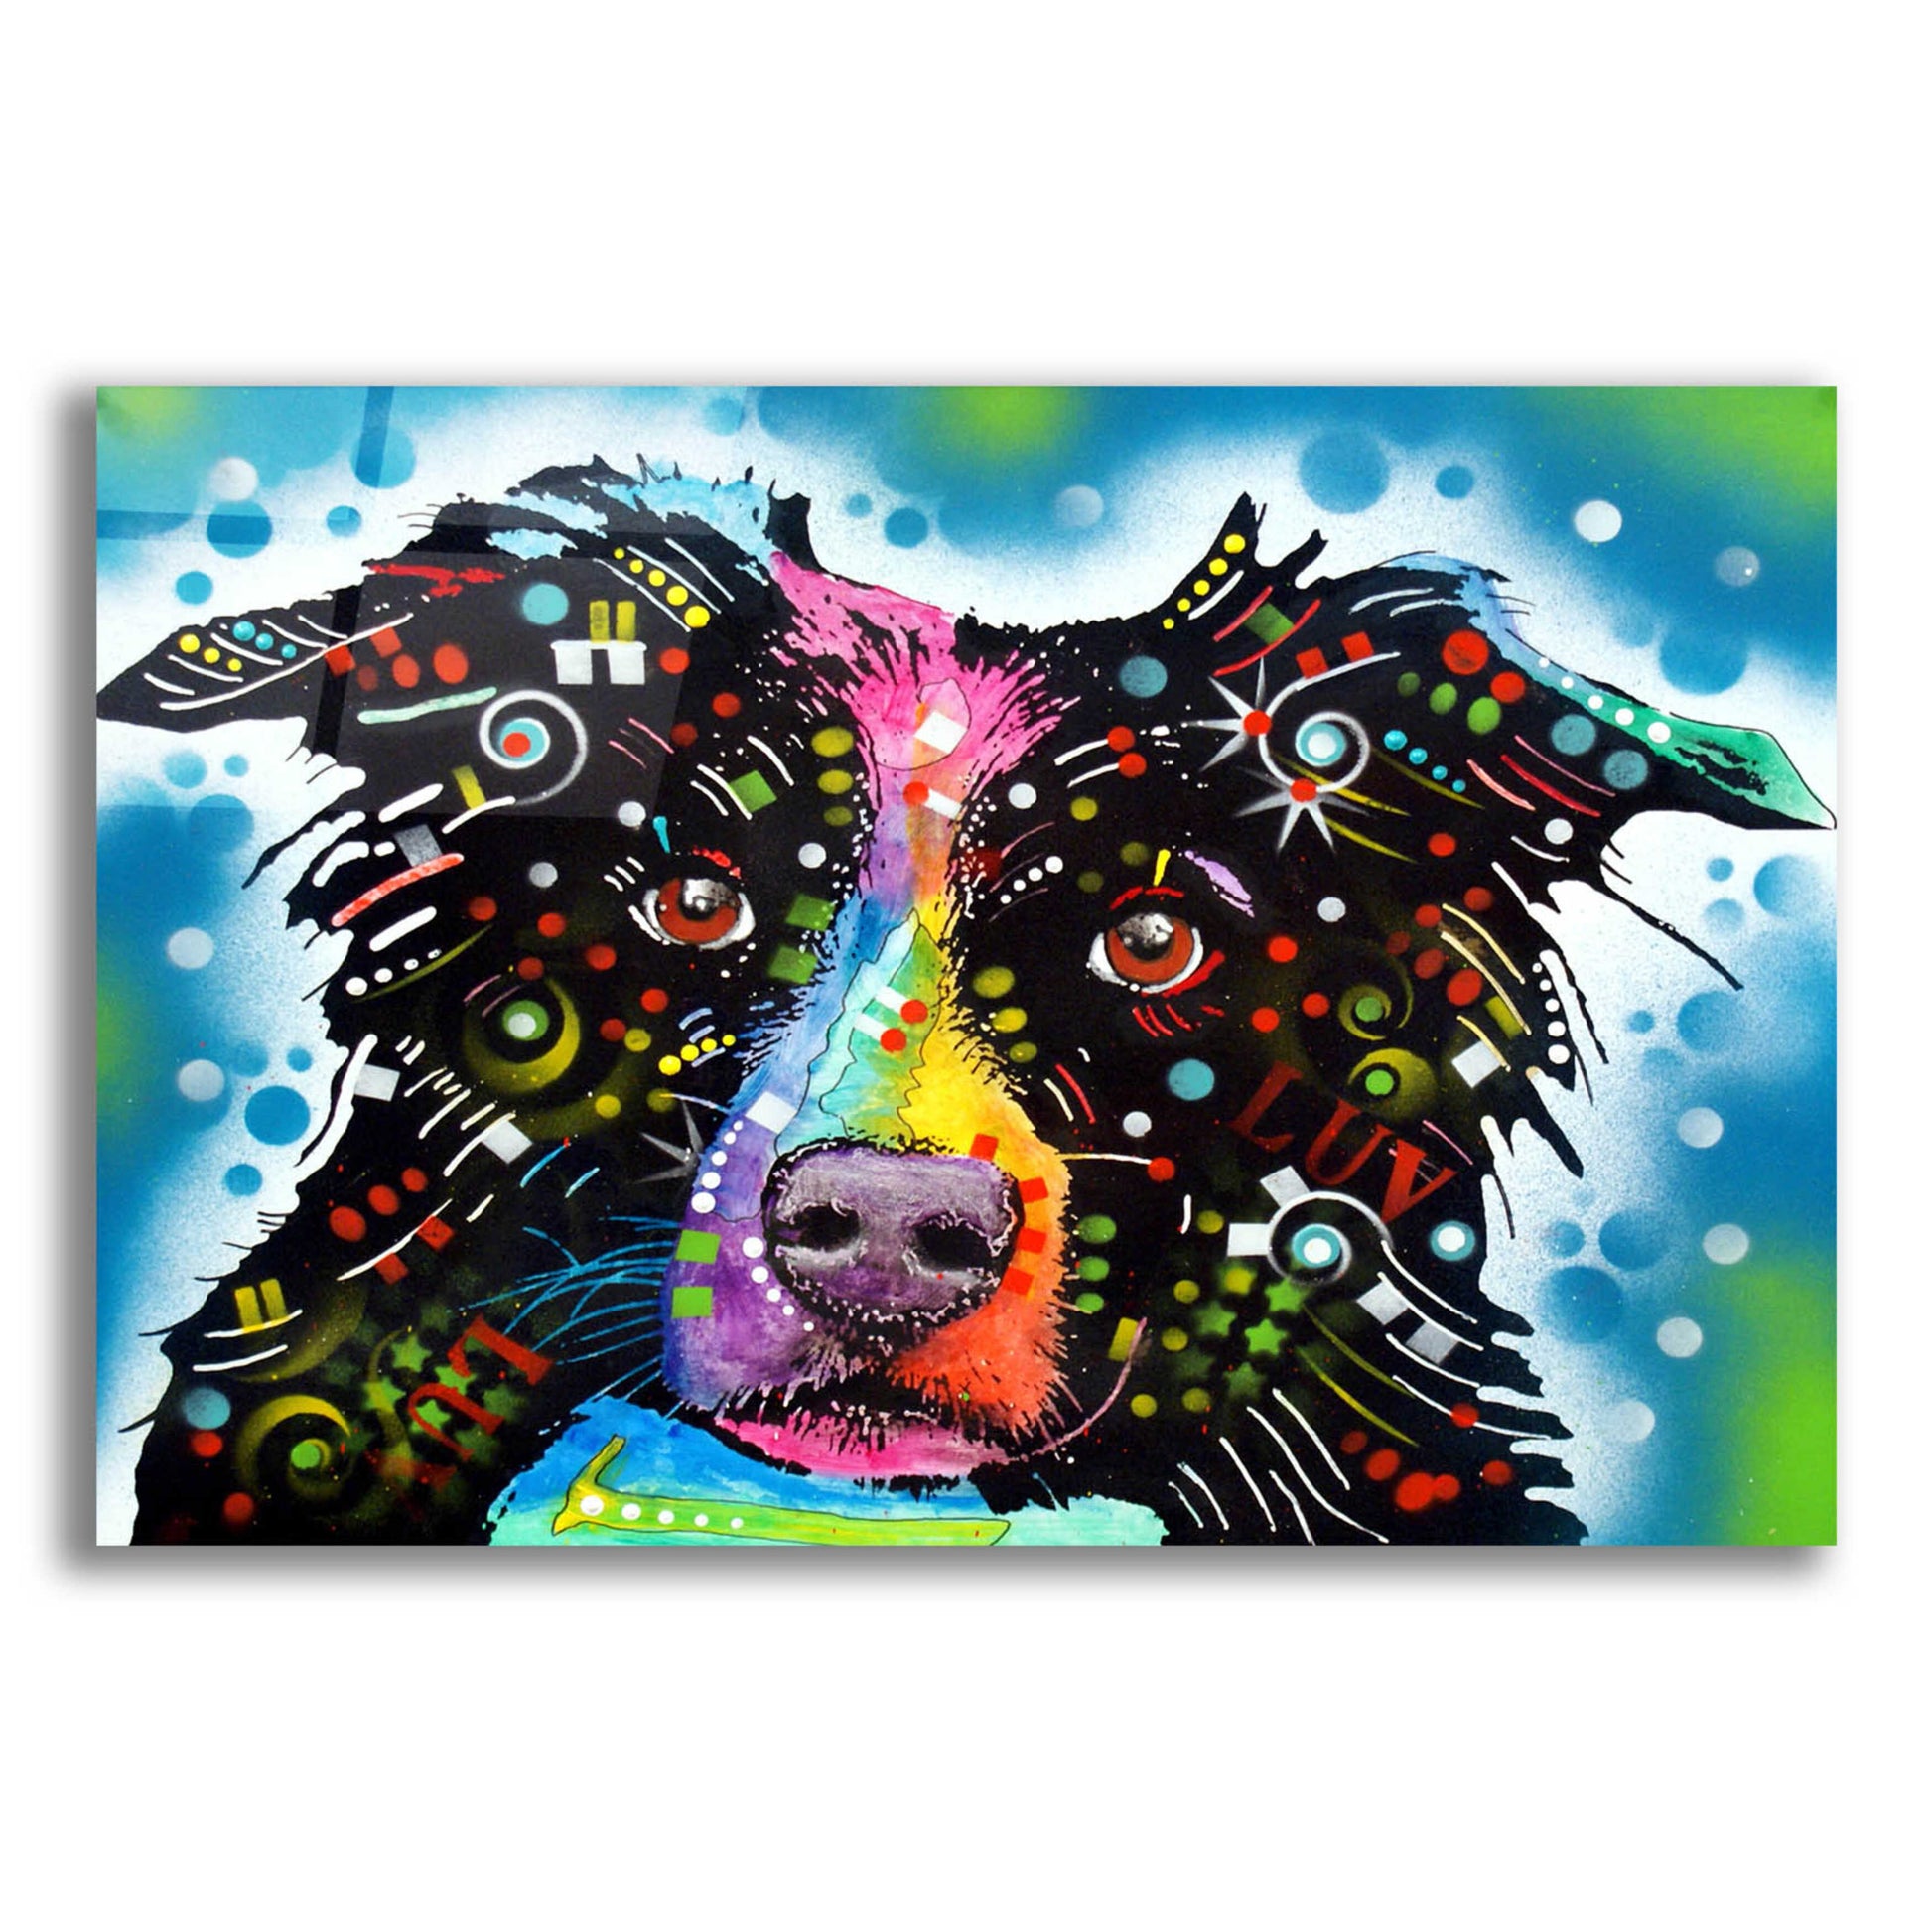 Epic Art 'Border Collie 3' by Dean Russo, Acrylic Glass Wall Art,16x12